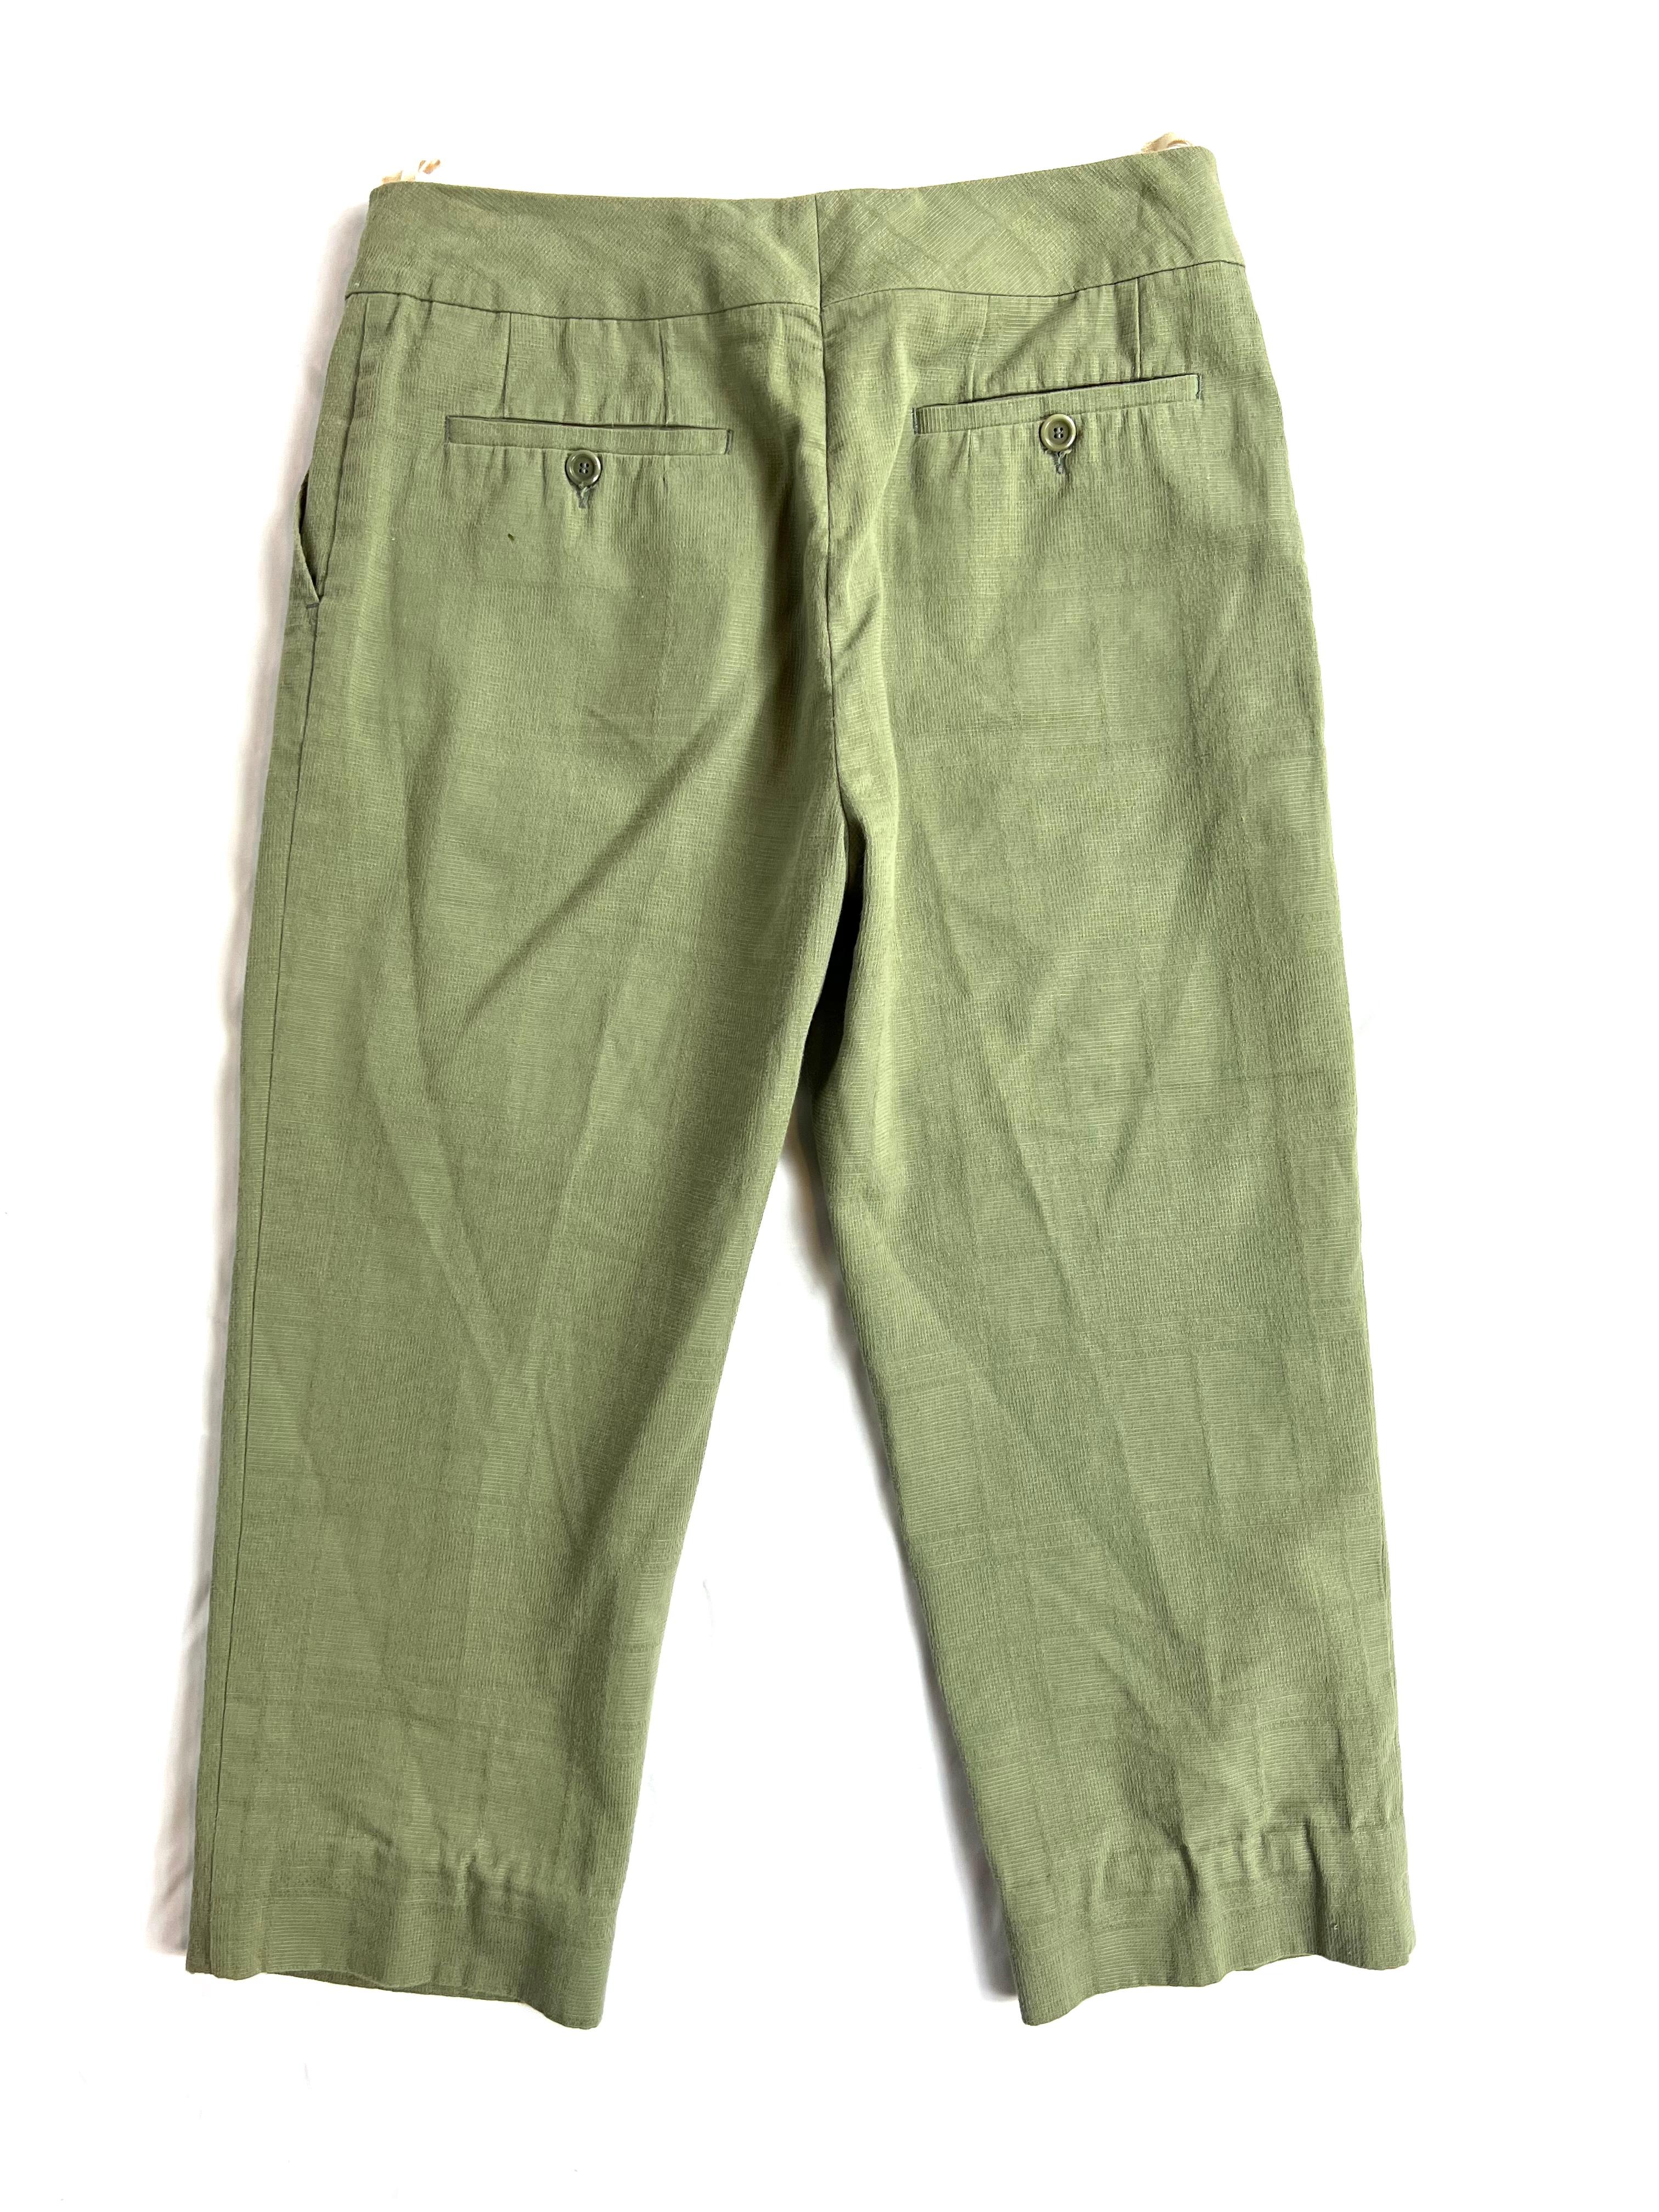 Marni Green Capri Pants, Size 40 In Excellent Condition For Sale In Beverly Hills, CA